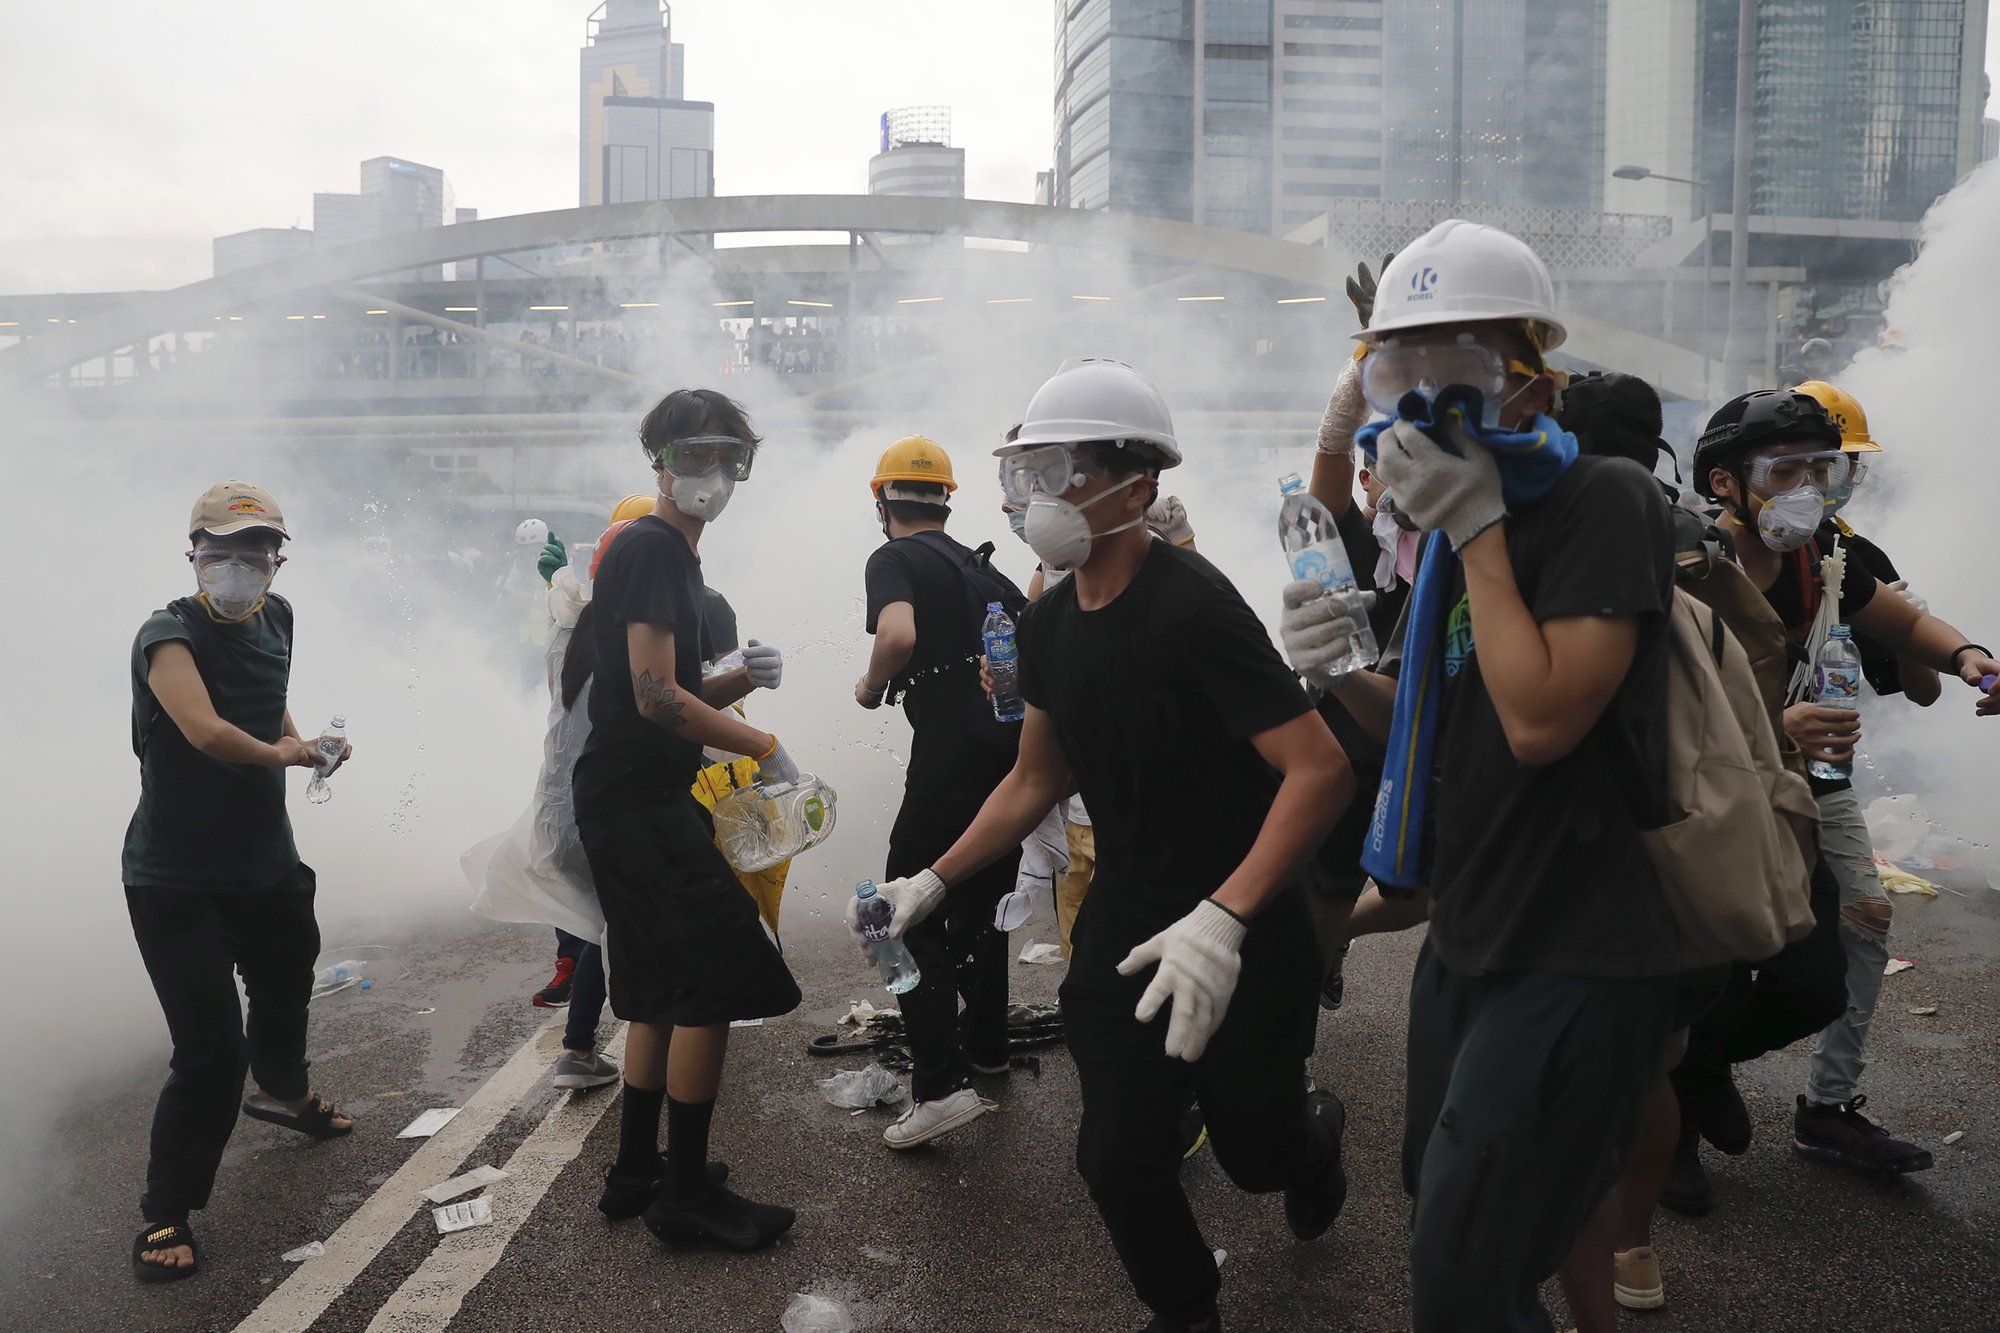 Demonstrators react to a cloud of tear gas near the Legislative Council in Hong Kong, Wednesday, June 12, 2019. Hong Kong police fired tear gas and high-pressure water hoses against protesters who had massed outside government headquarters Wednesday in opposition to a proposed extradition bill that has become a lightning rod for concerns over greater Chinese control and erosion of civil liberties in the semiautonomous territory. (AP Photo/Kin Cheung)